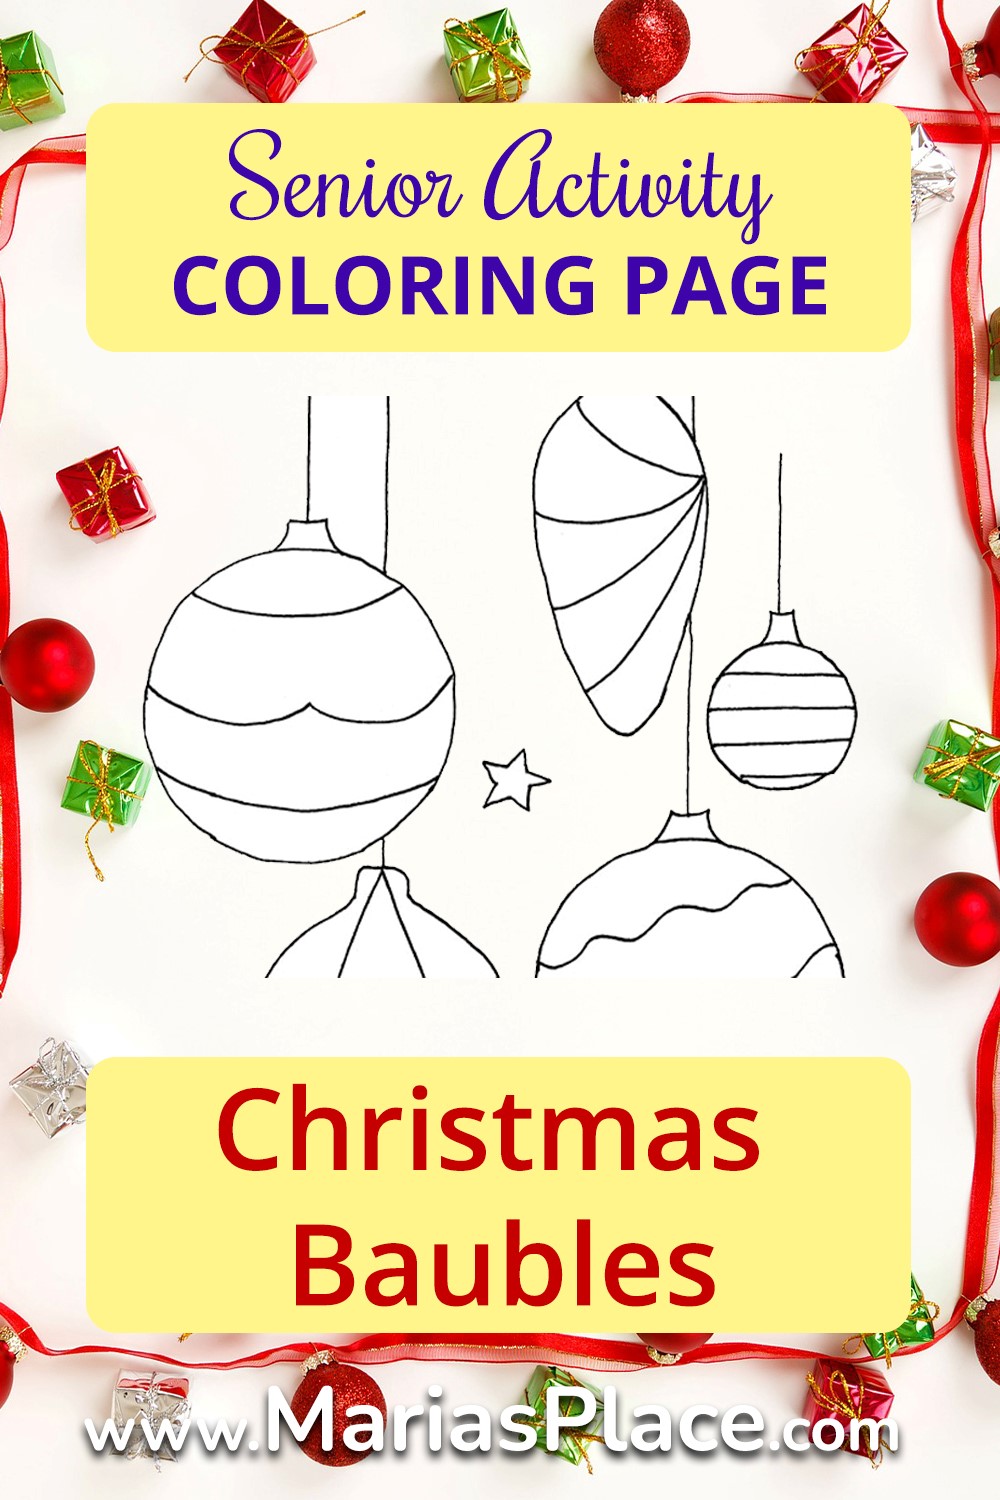 Coloring – Christmas Baubles